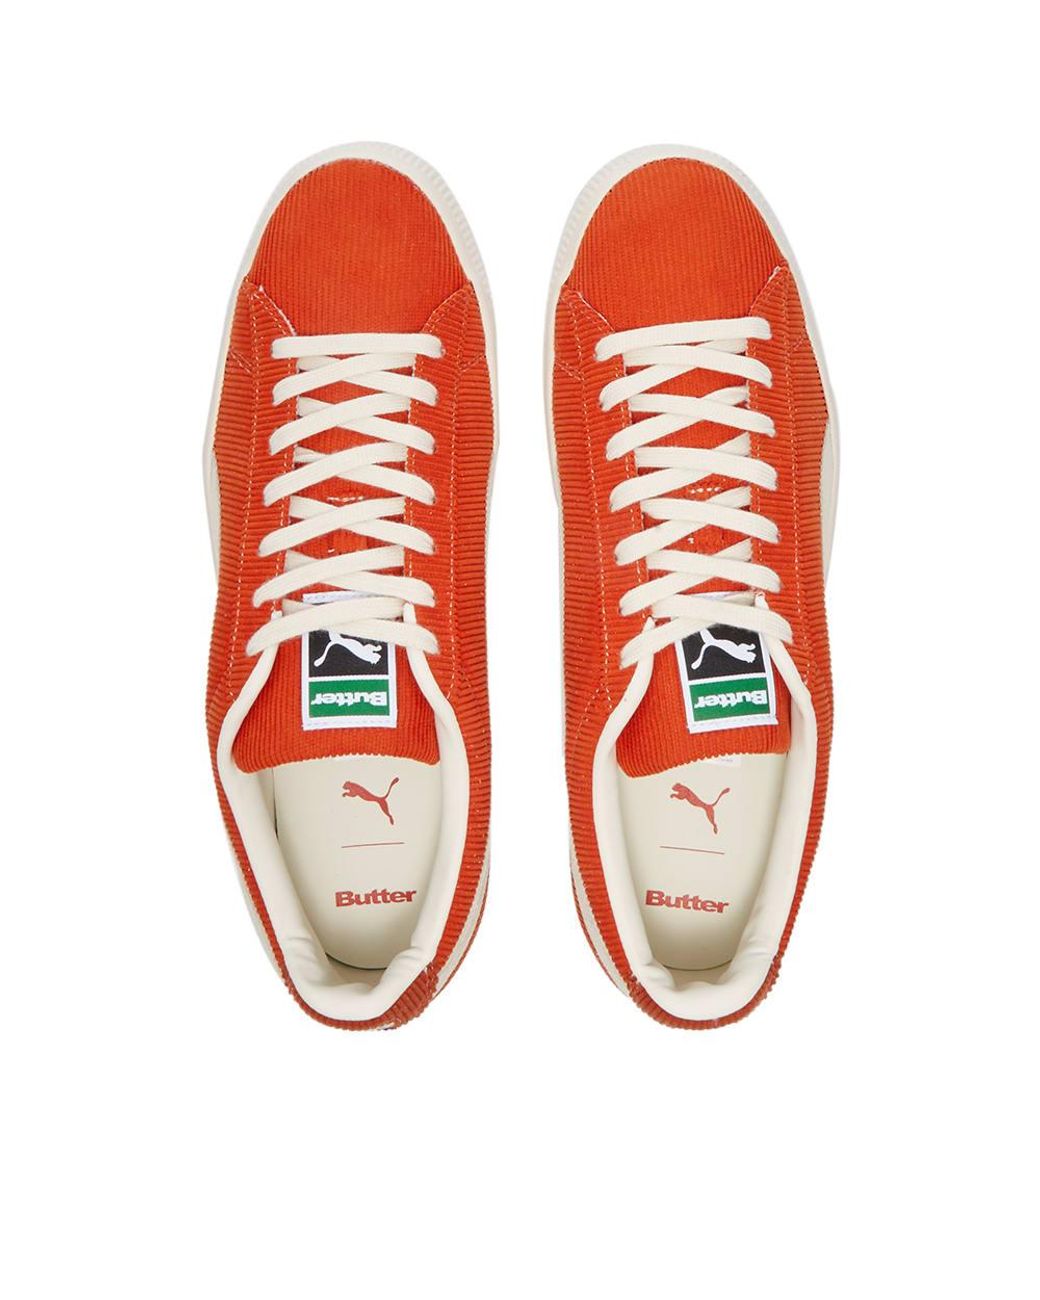 PUMA X Butter Goods Cord Basket Sneakers for Men | Lyst UK